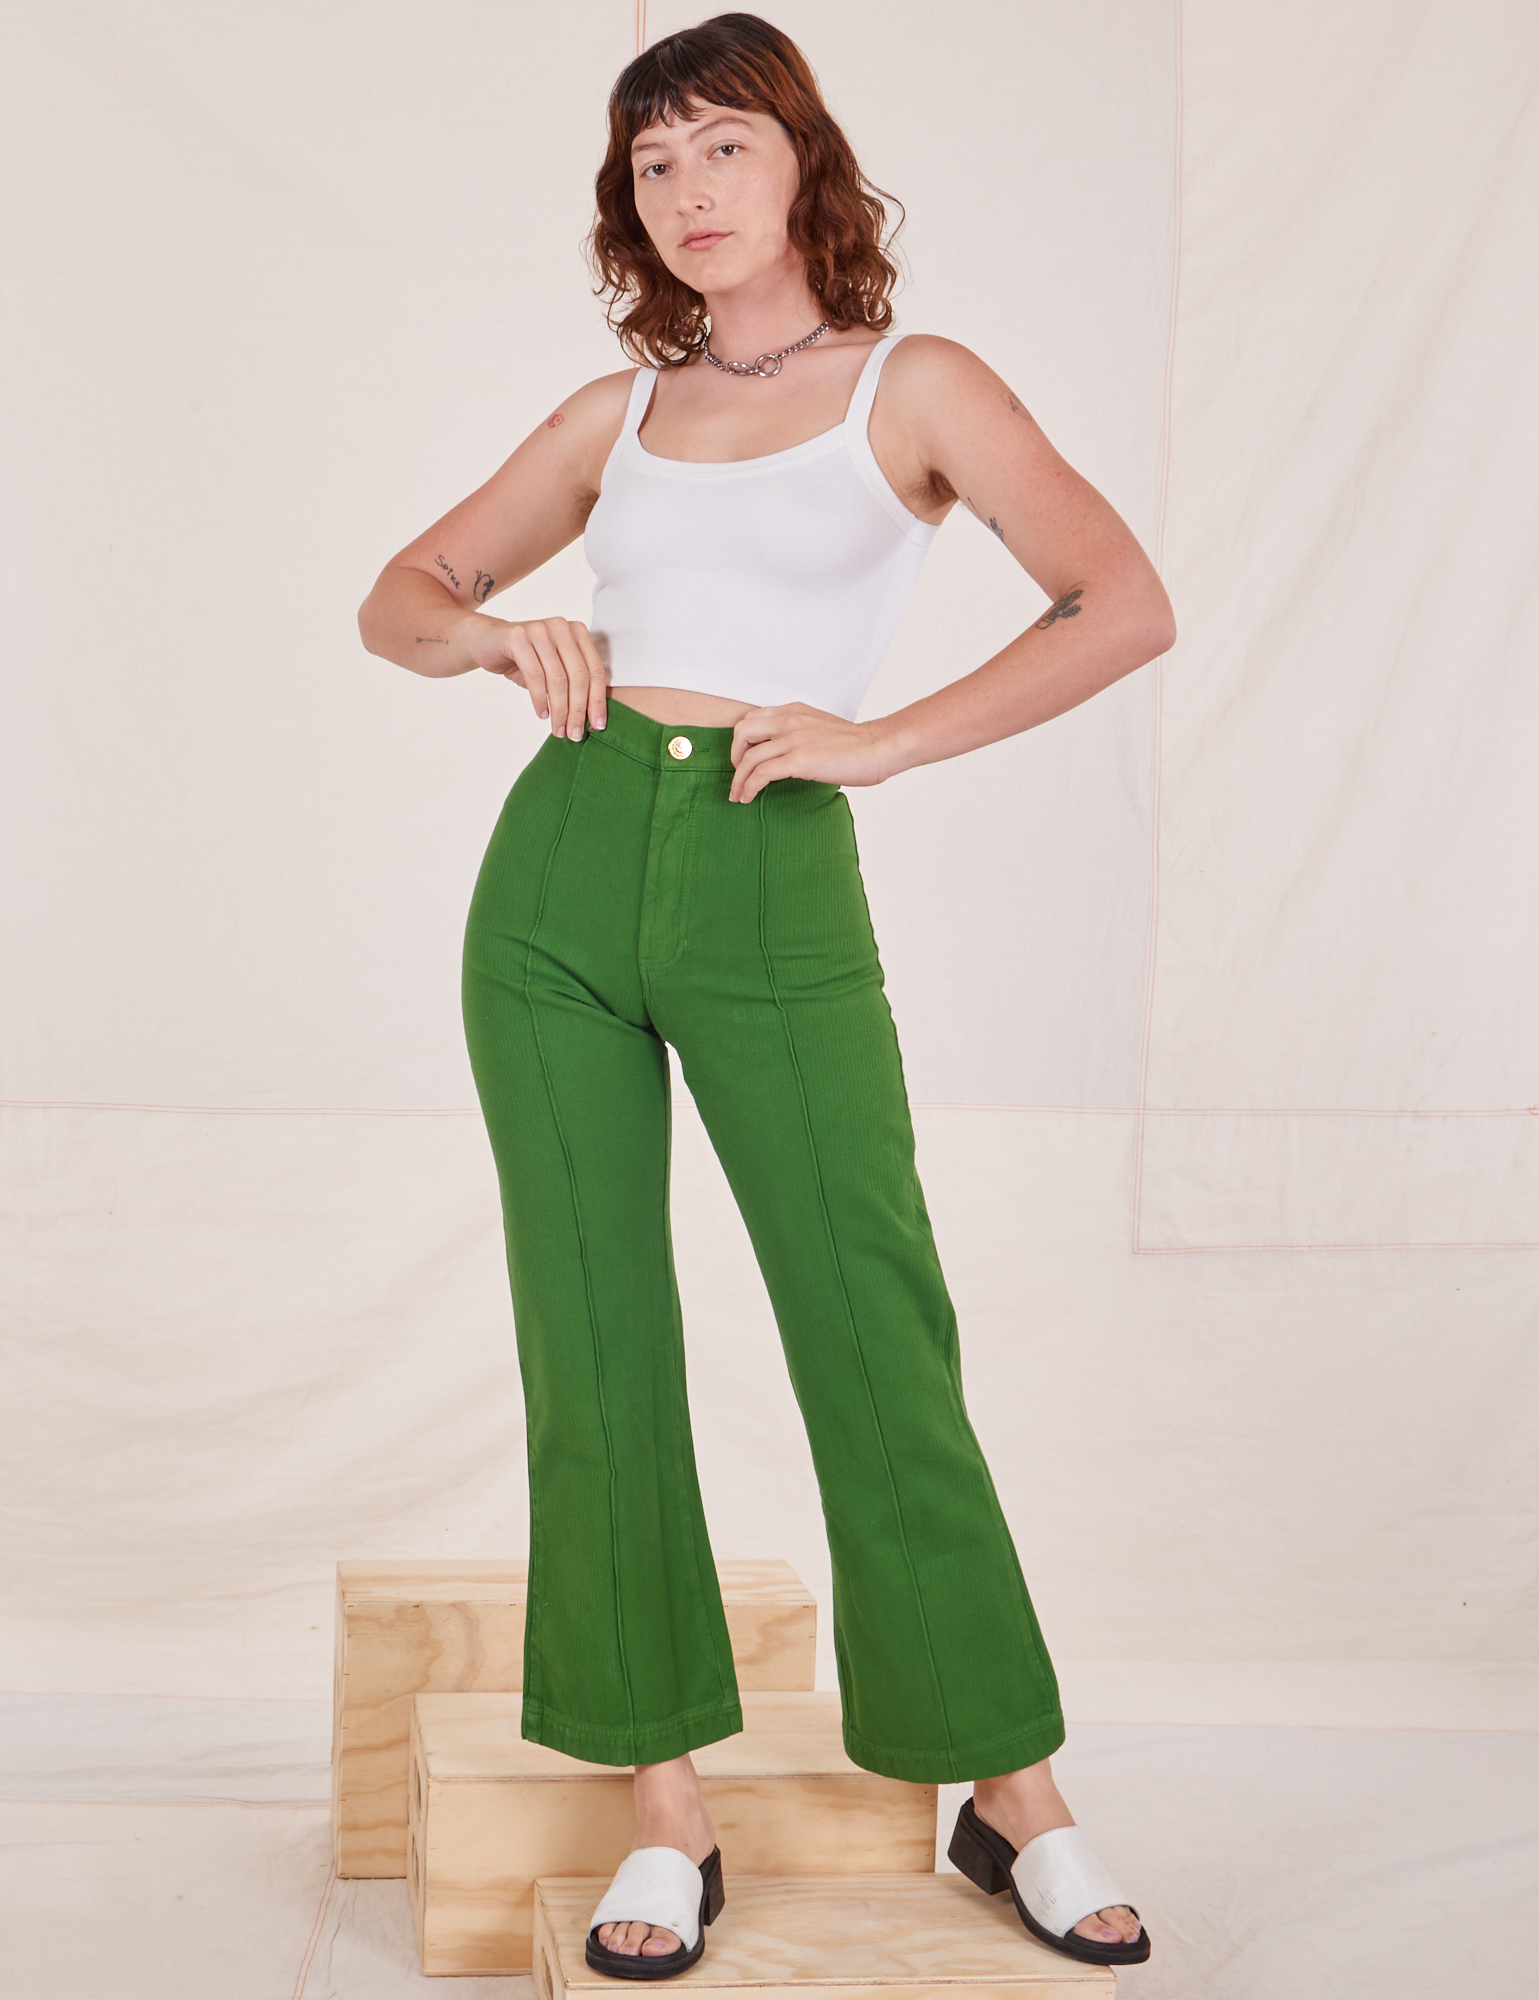 Alex is 5&#39;8&quot; and wearing XS Heritage Westerns in Lawn Green paired with vintage off-white Cropped Cami